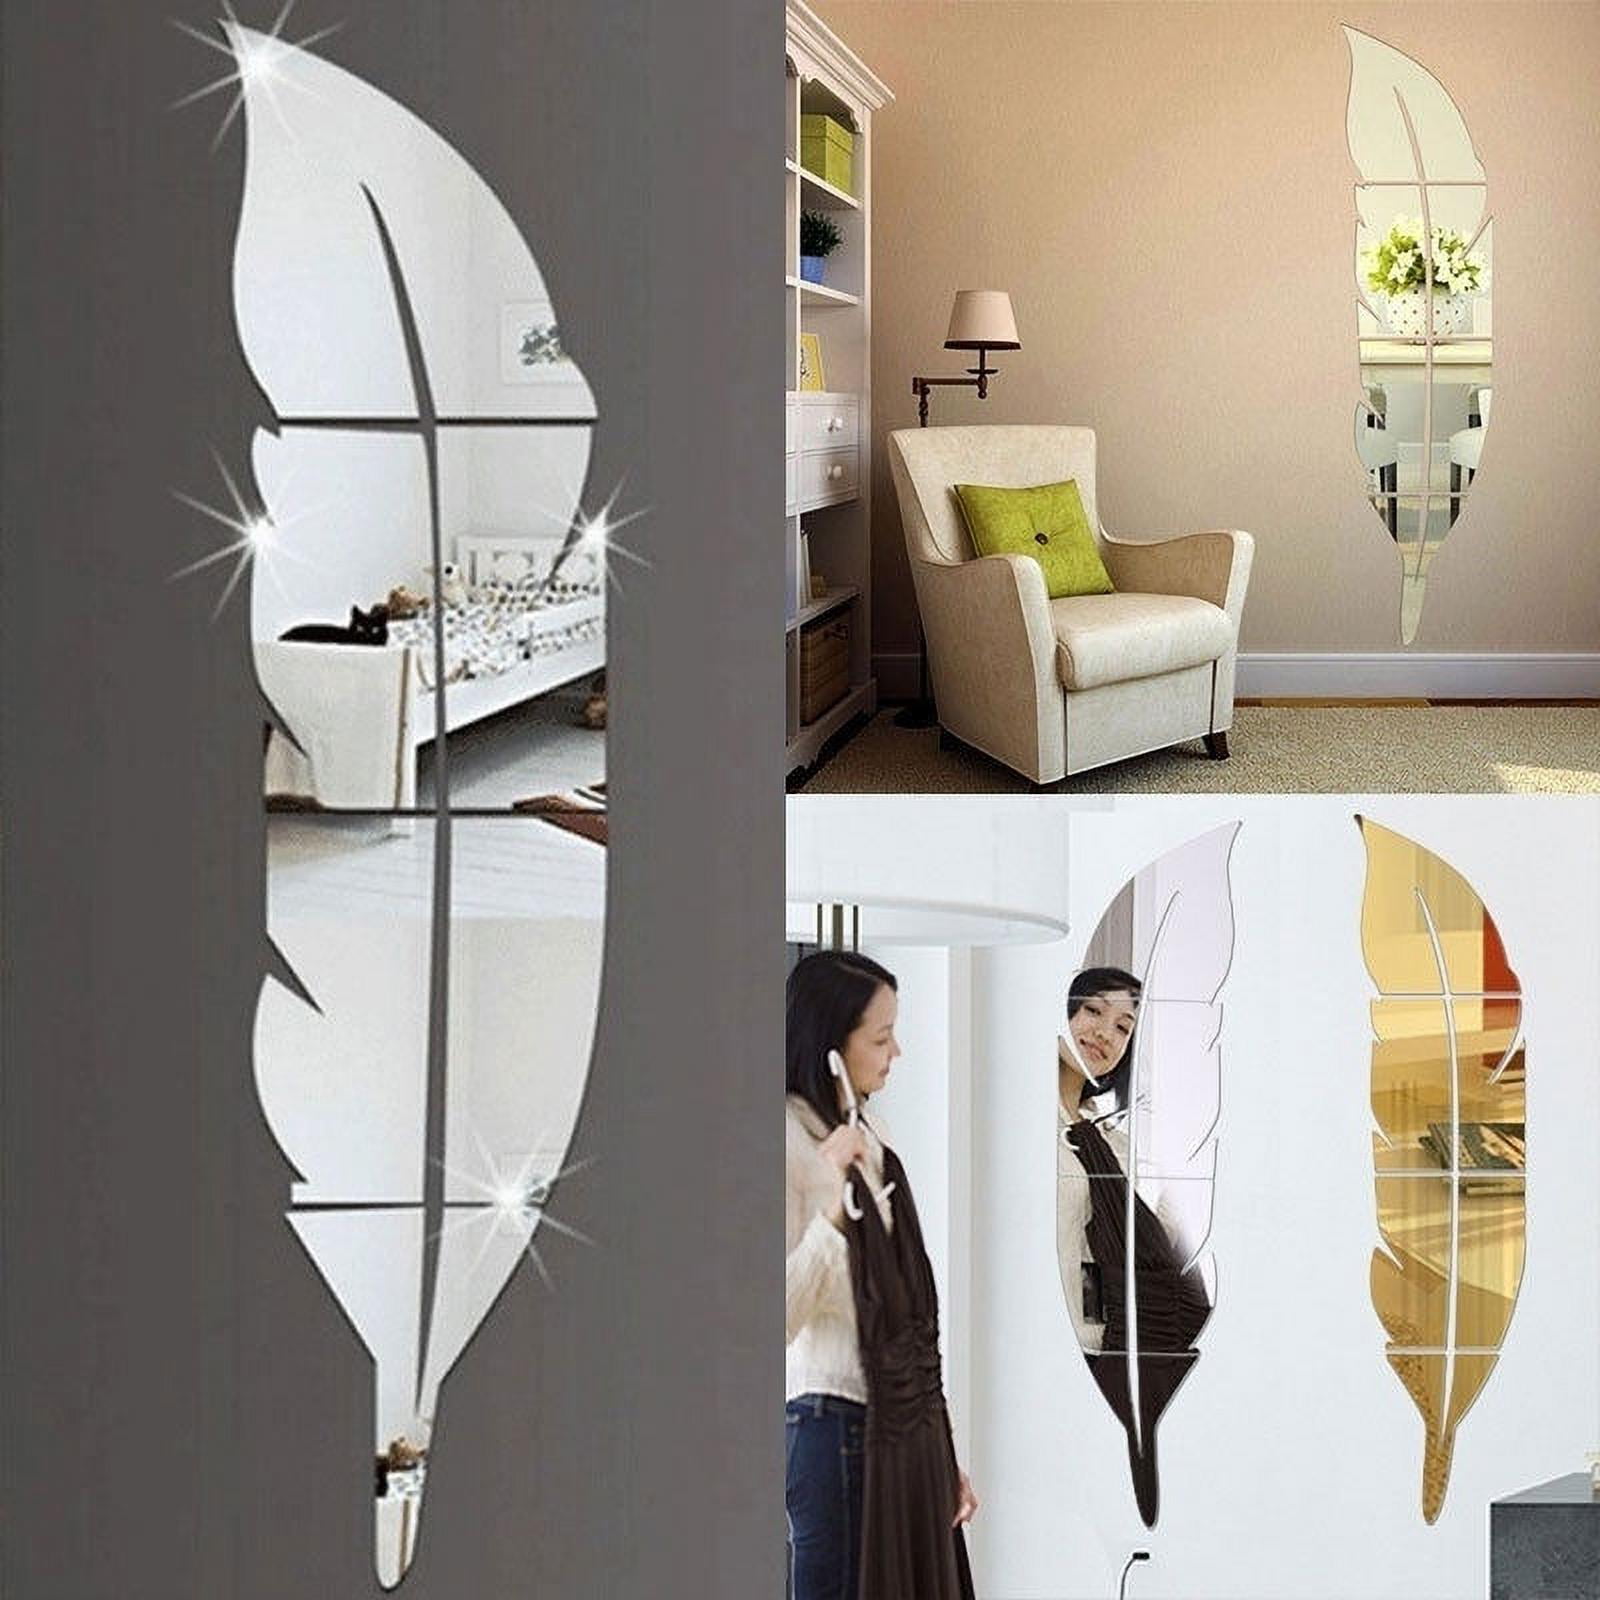 Removable Home Feather Mirror Wall Stickers Decal Art Vinyl Room DIY Decor-Left